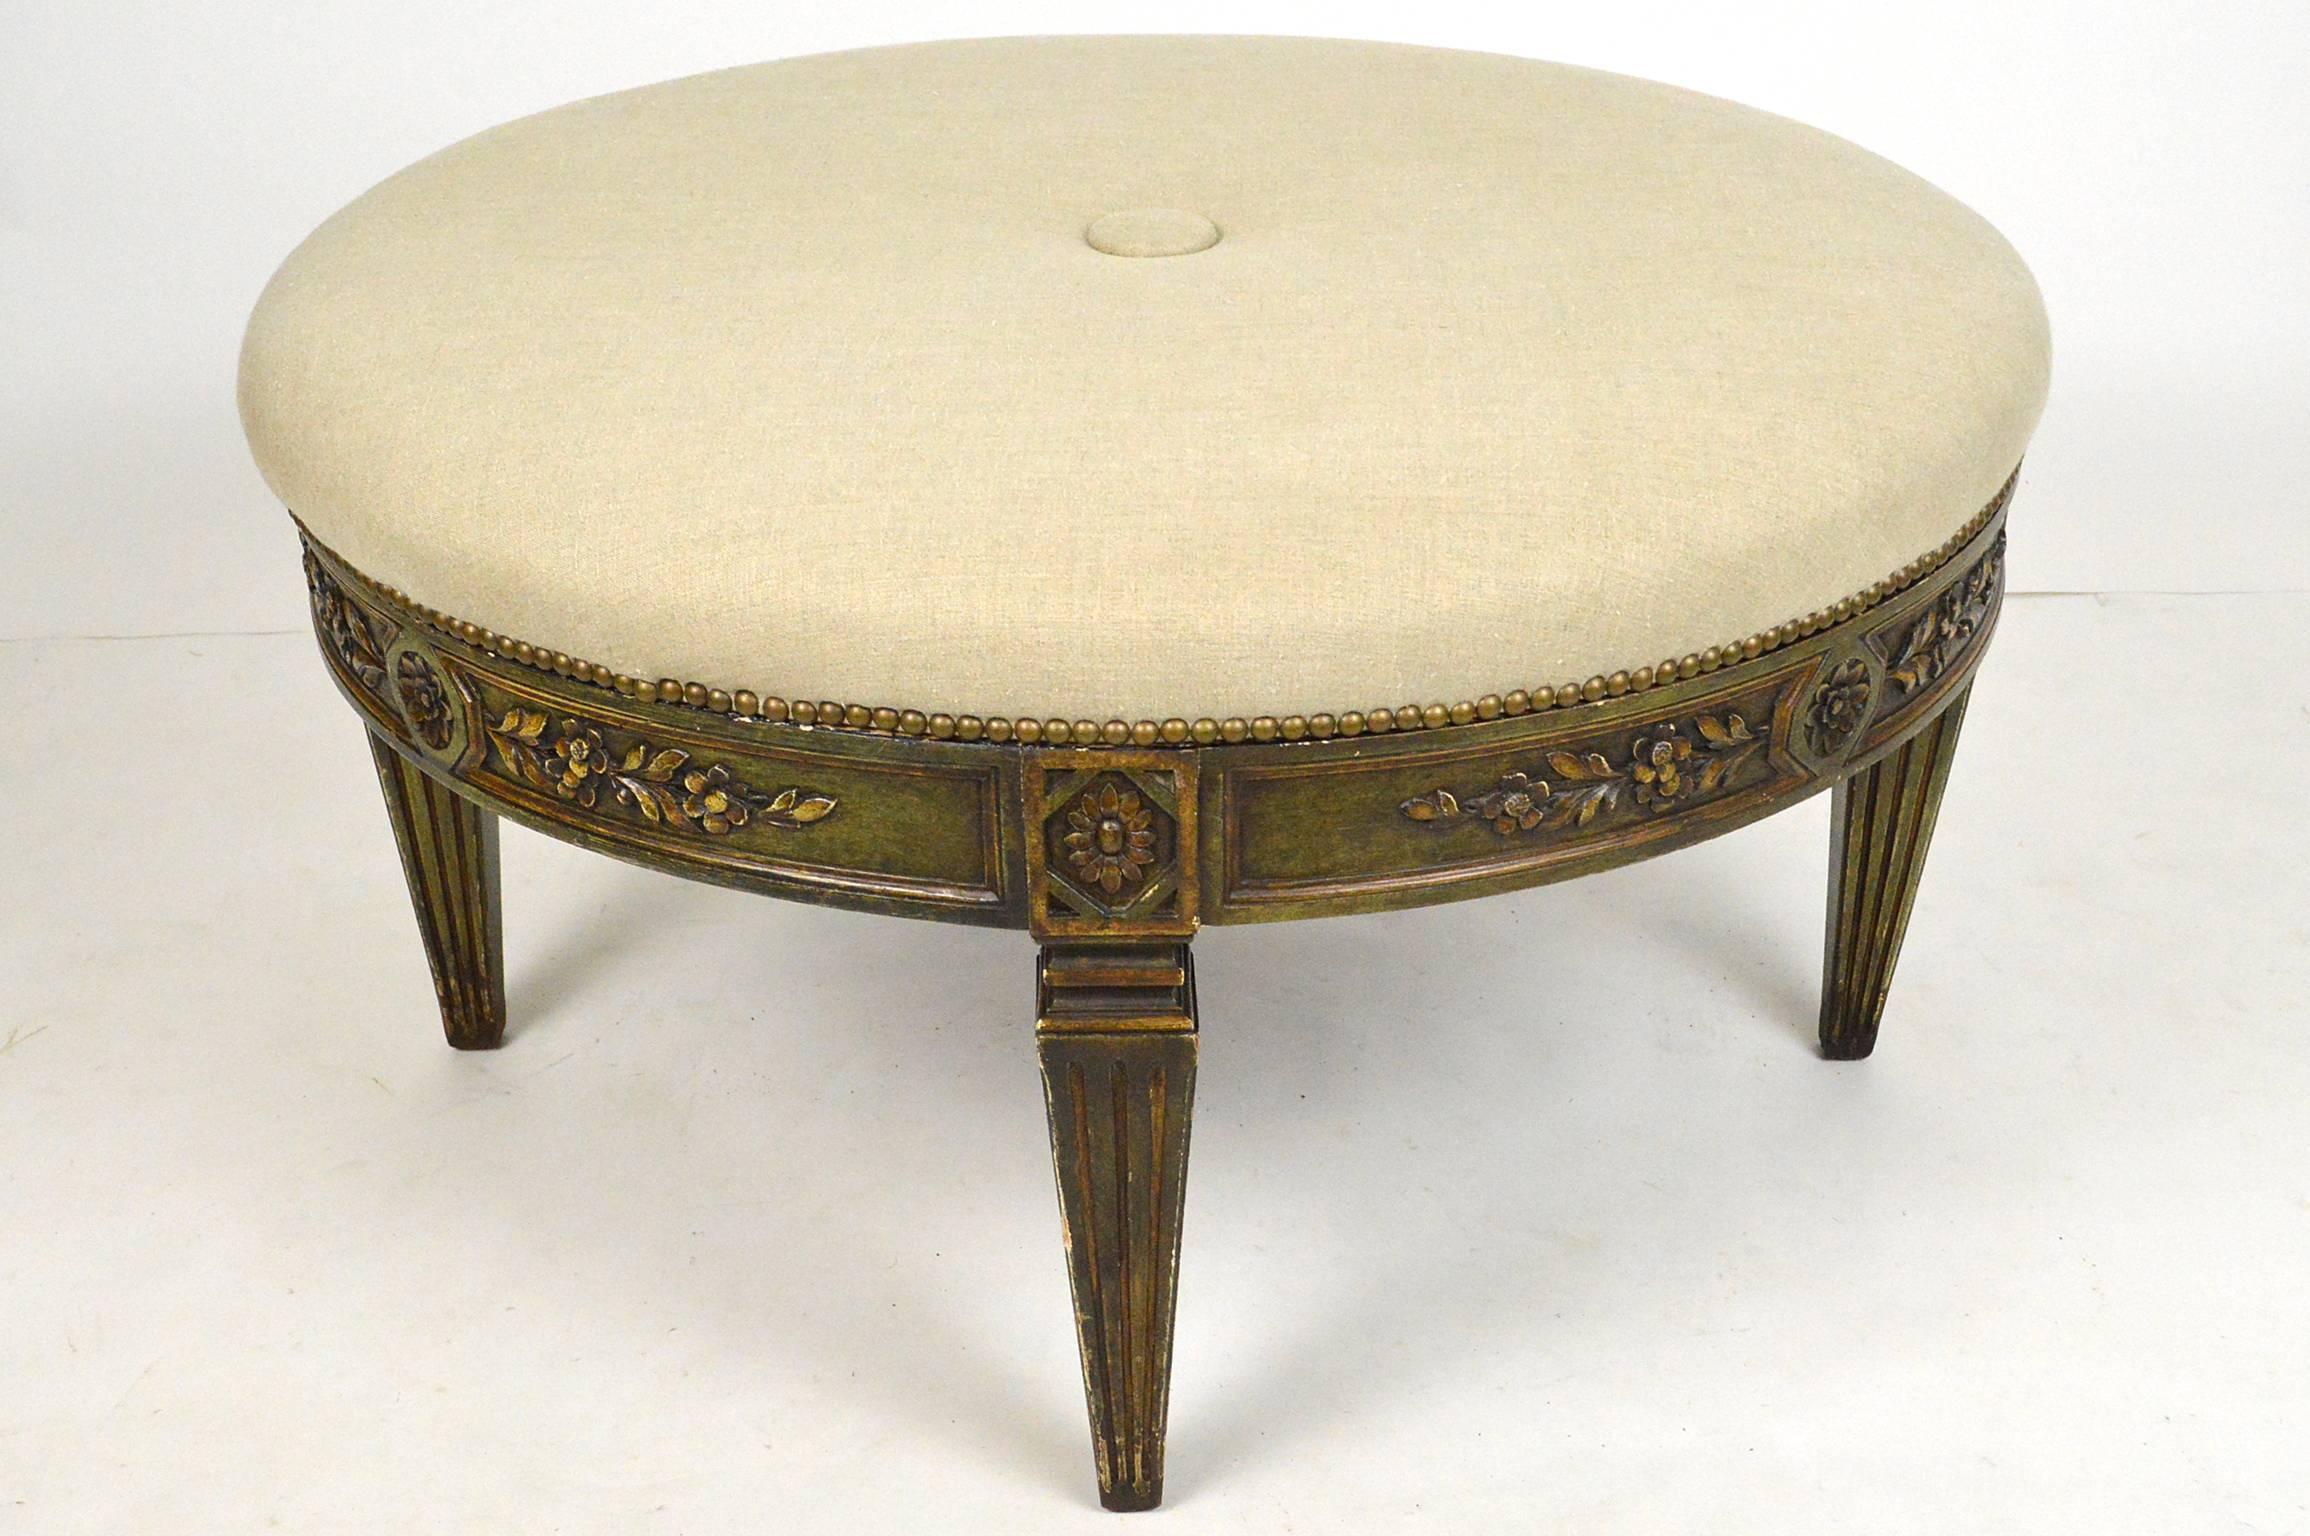 French neoclassical style carved wood and painted ottoman.